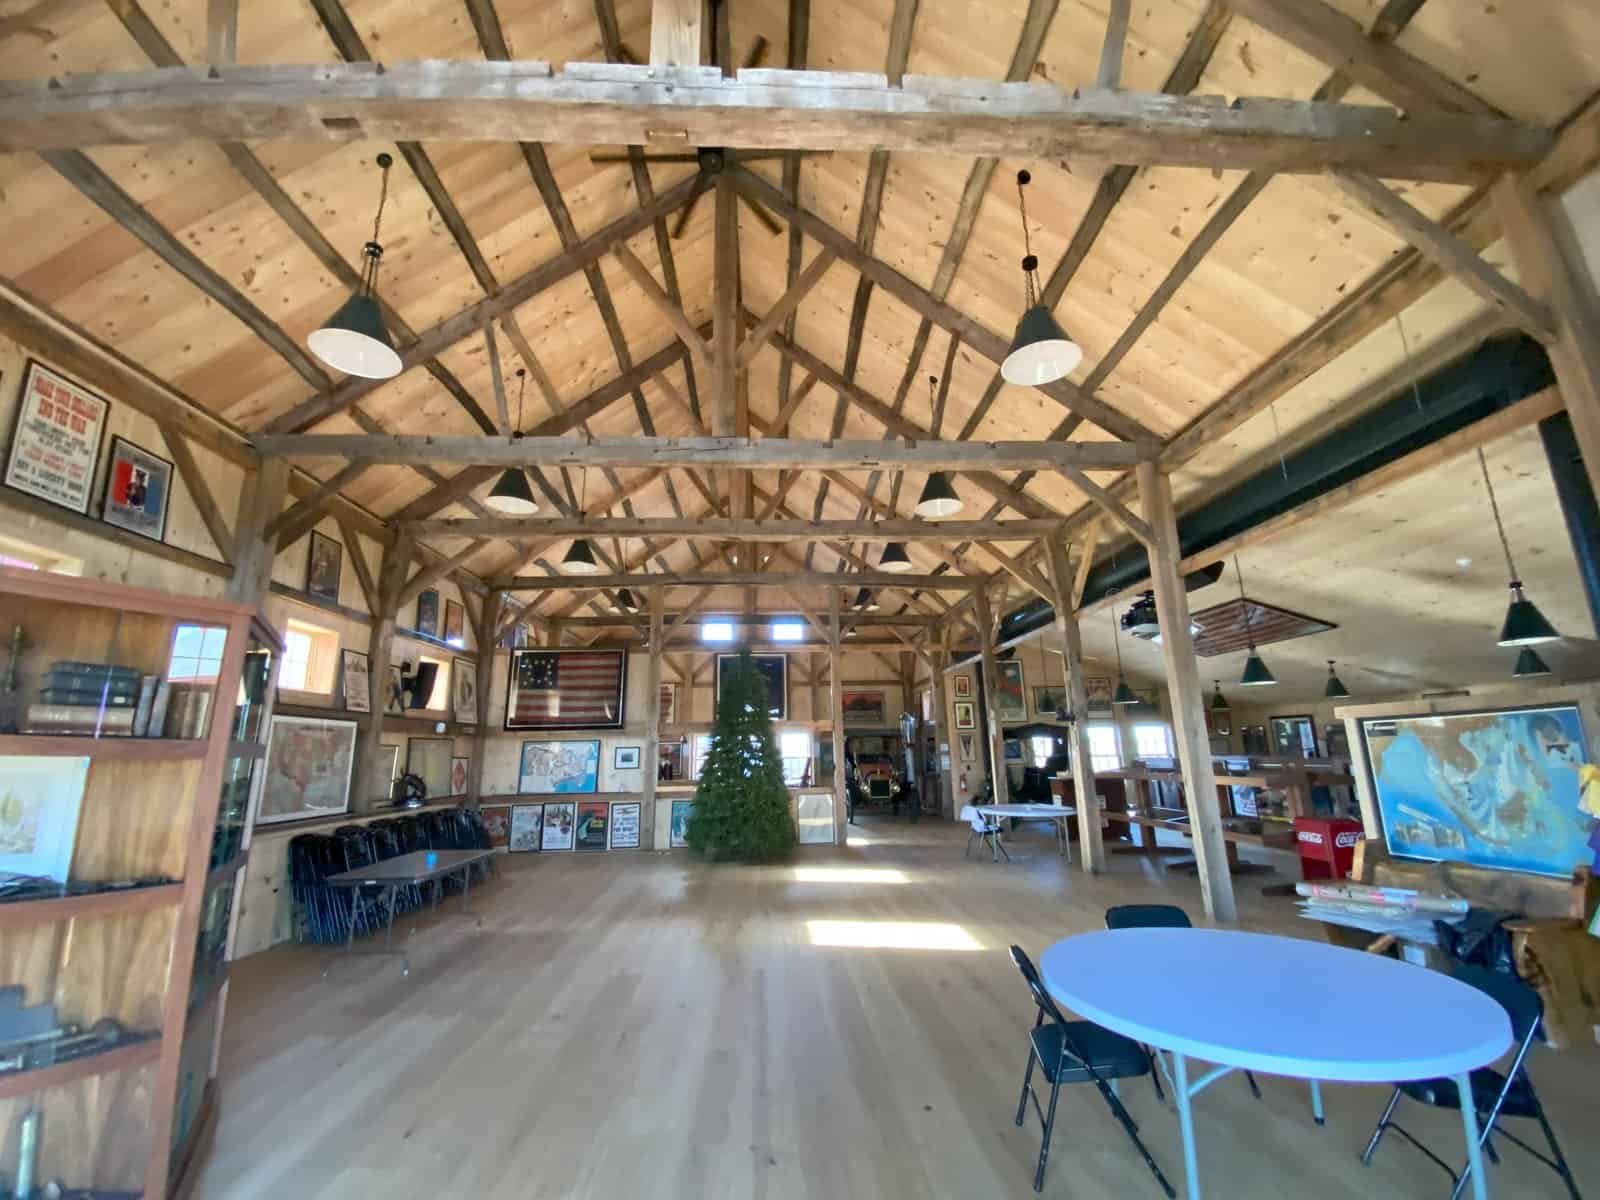 AFTER: The renovated 1793 barn interior features the exposed reconstructed antique timber frame.